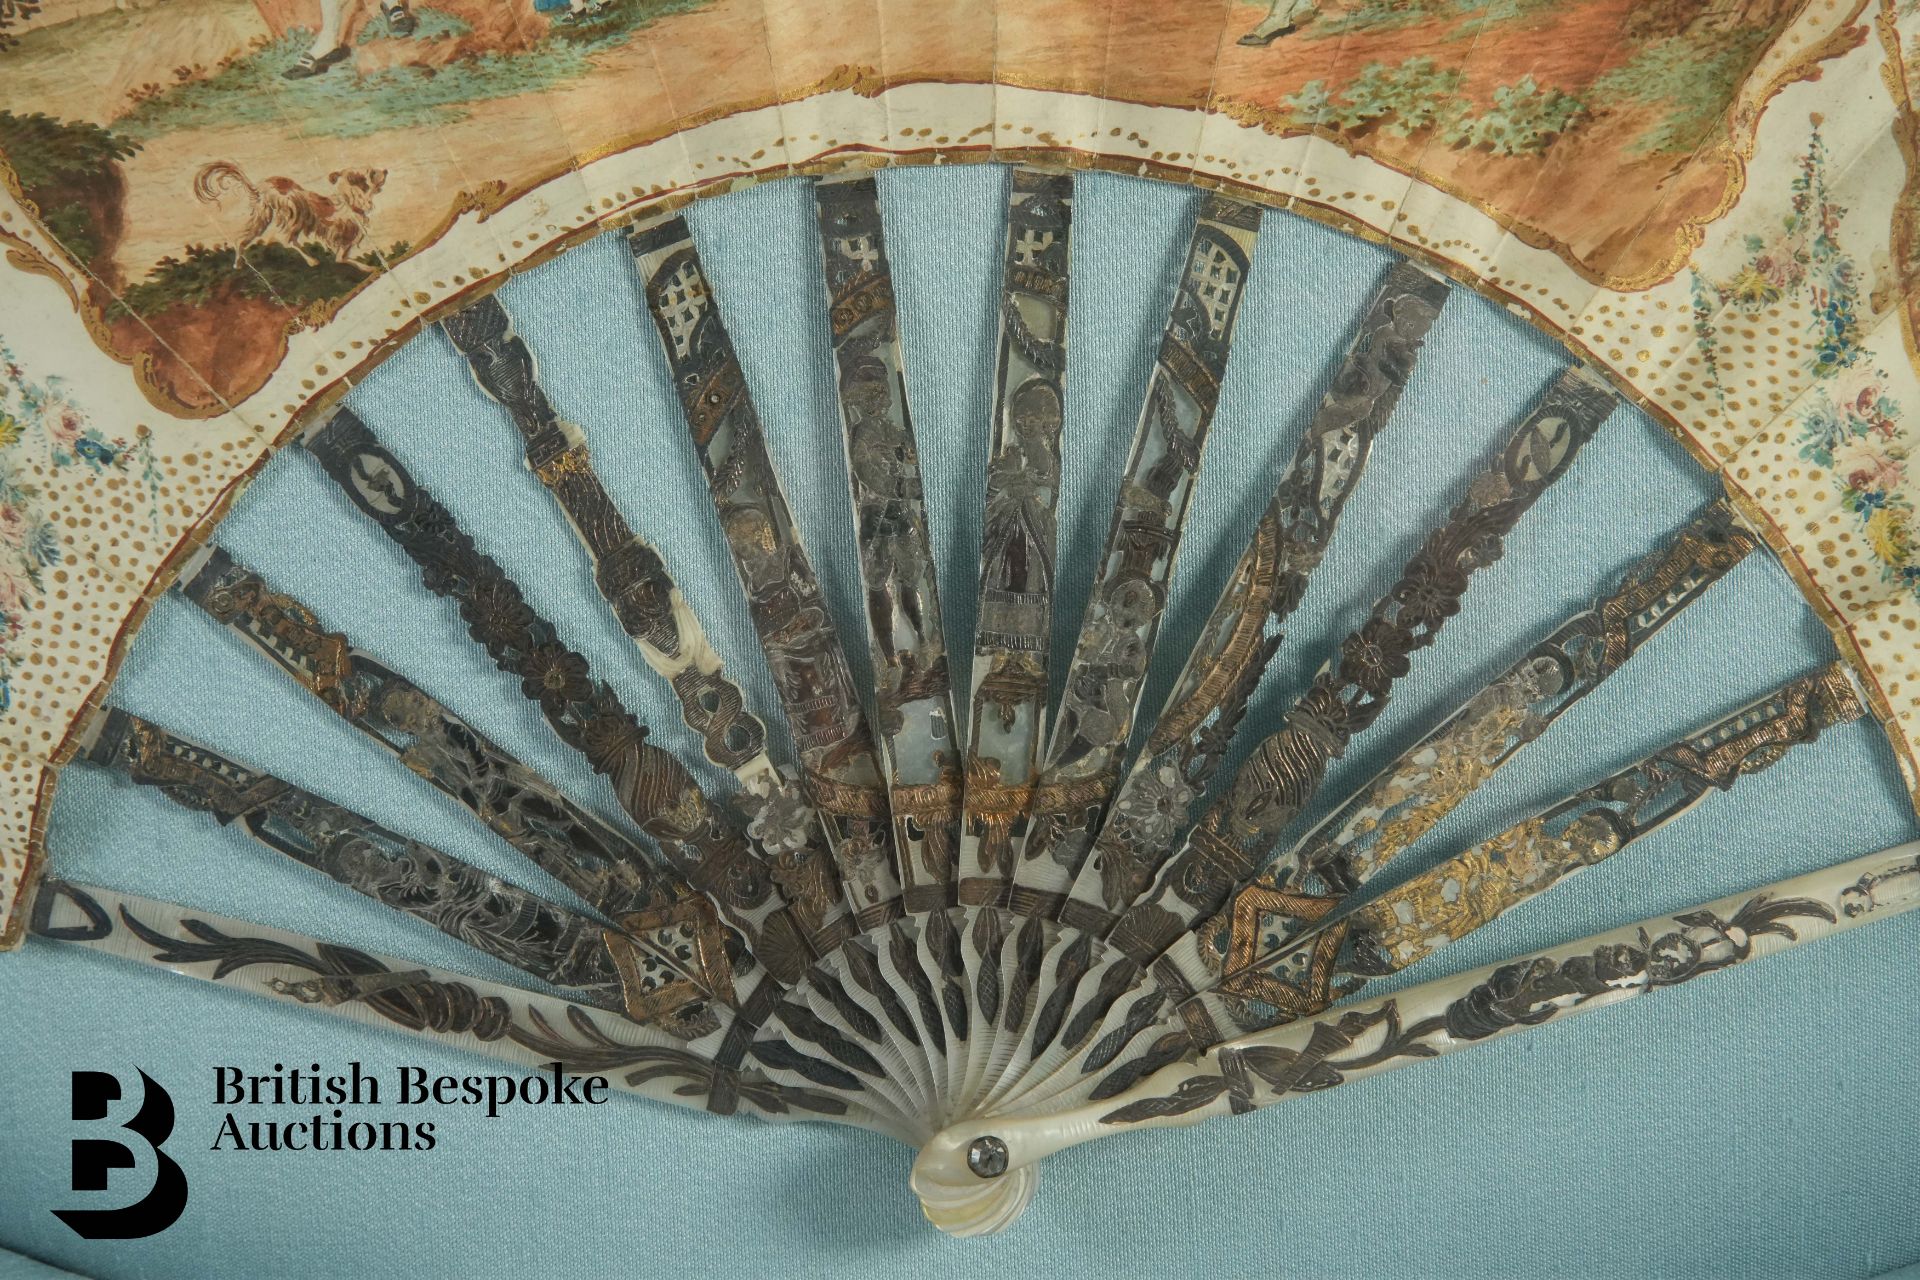 18th Century Continental Mother of Pearl Fan - Image 2 of 6